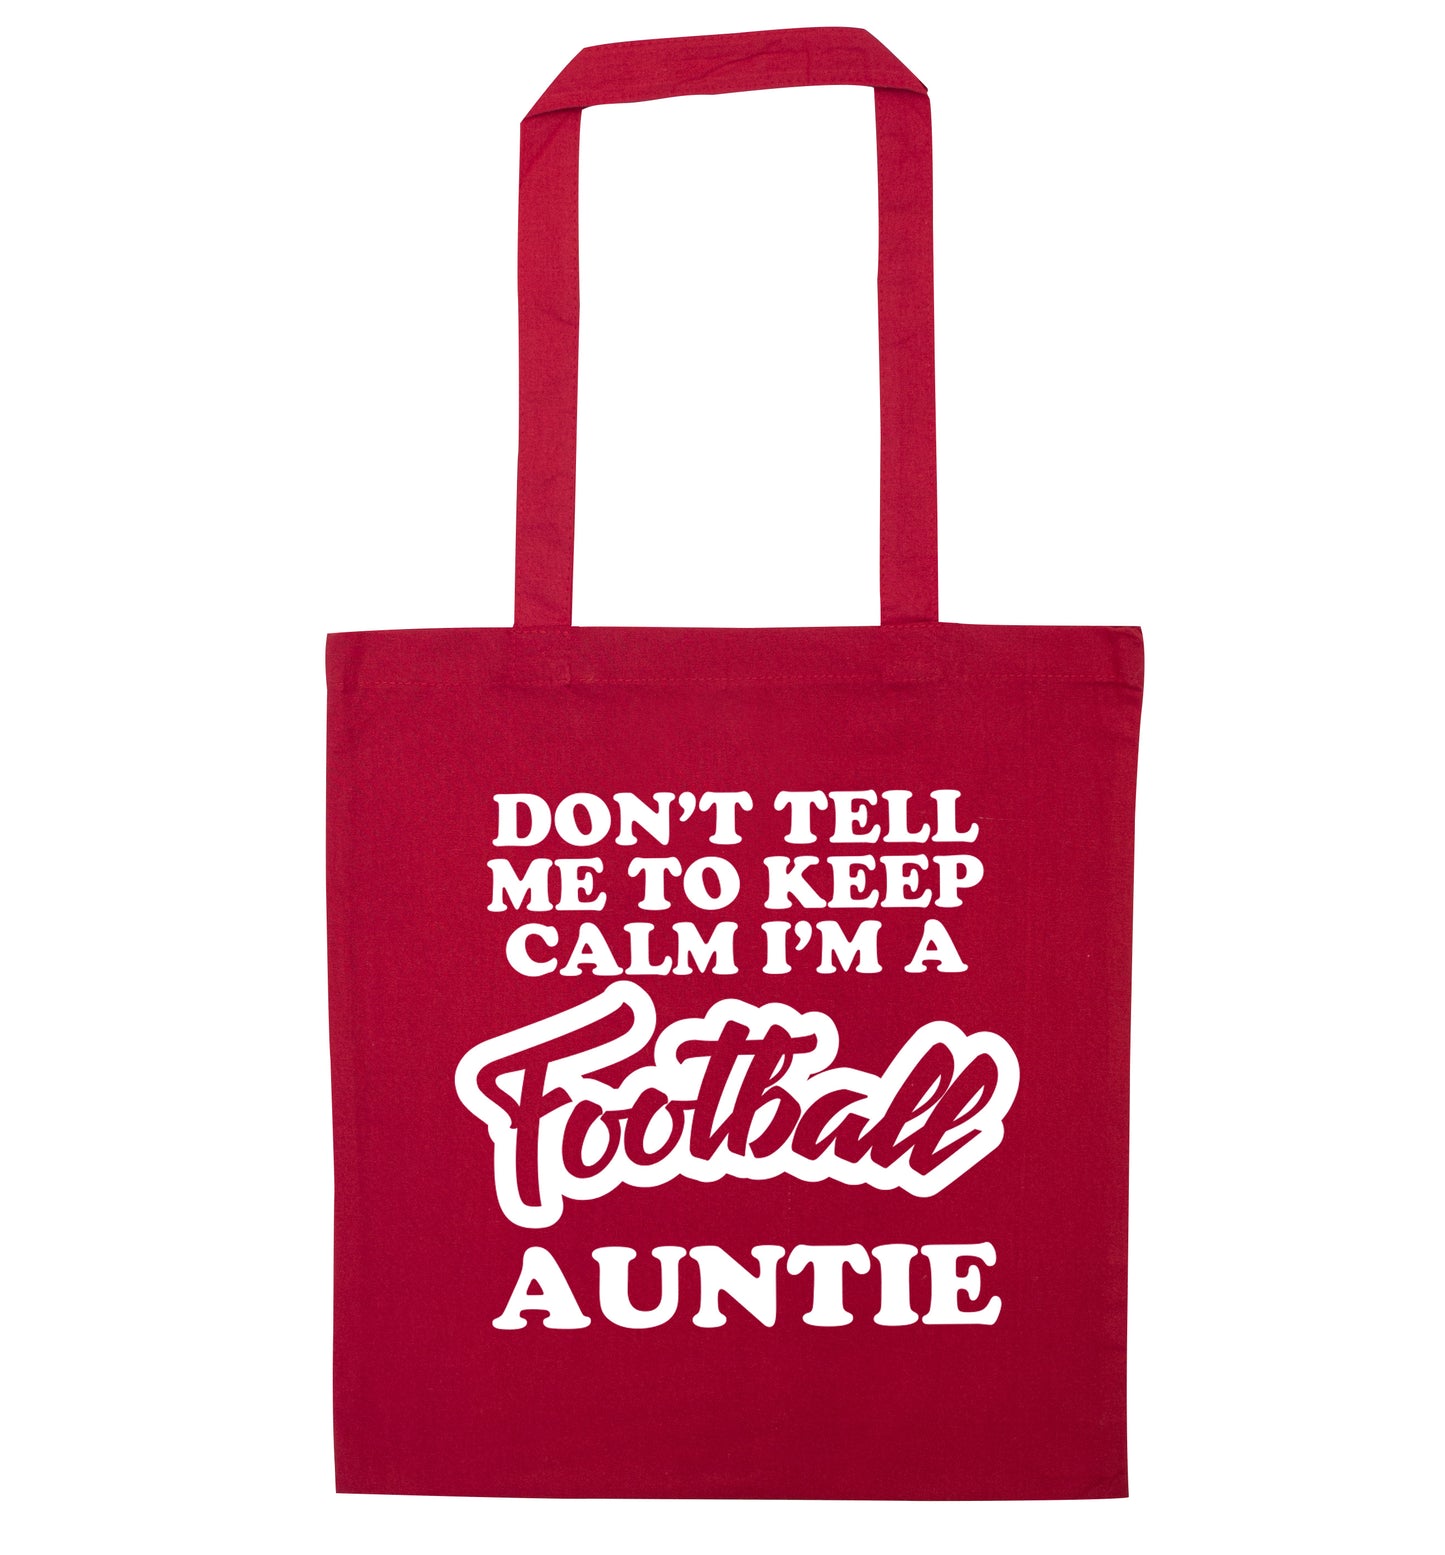 Don't tell me to keep calm I'm a football auntie red tote bag